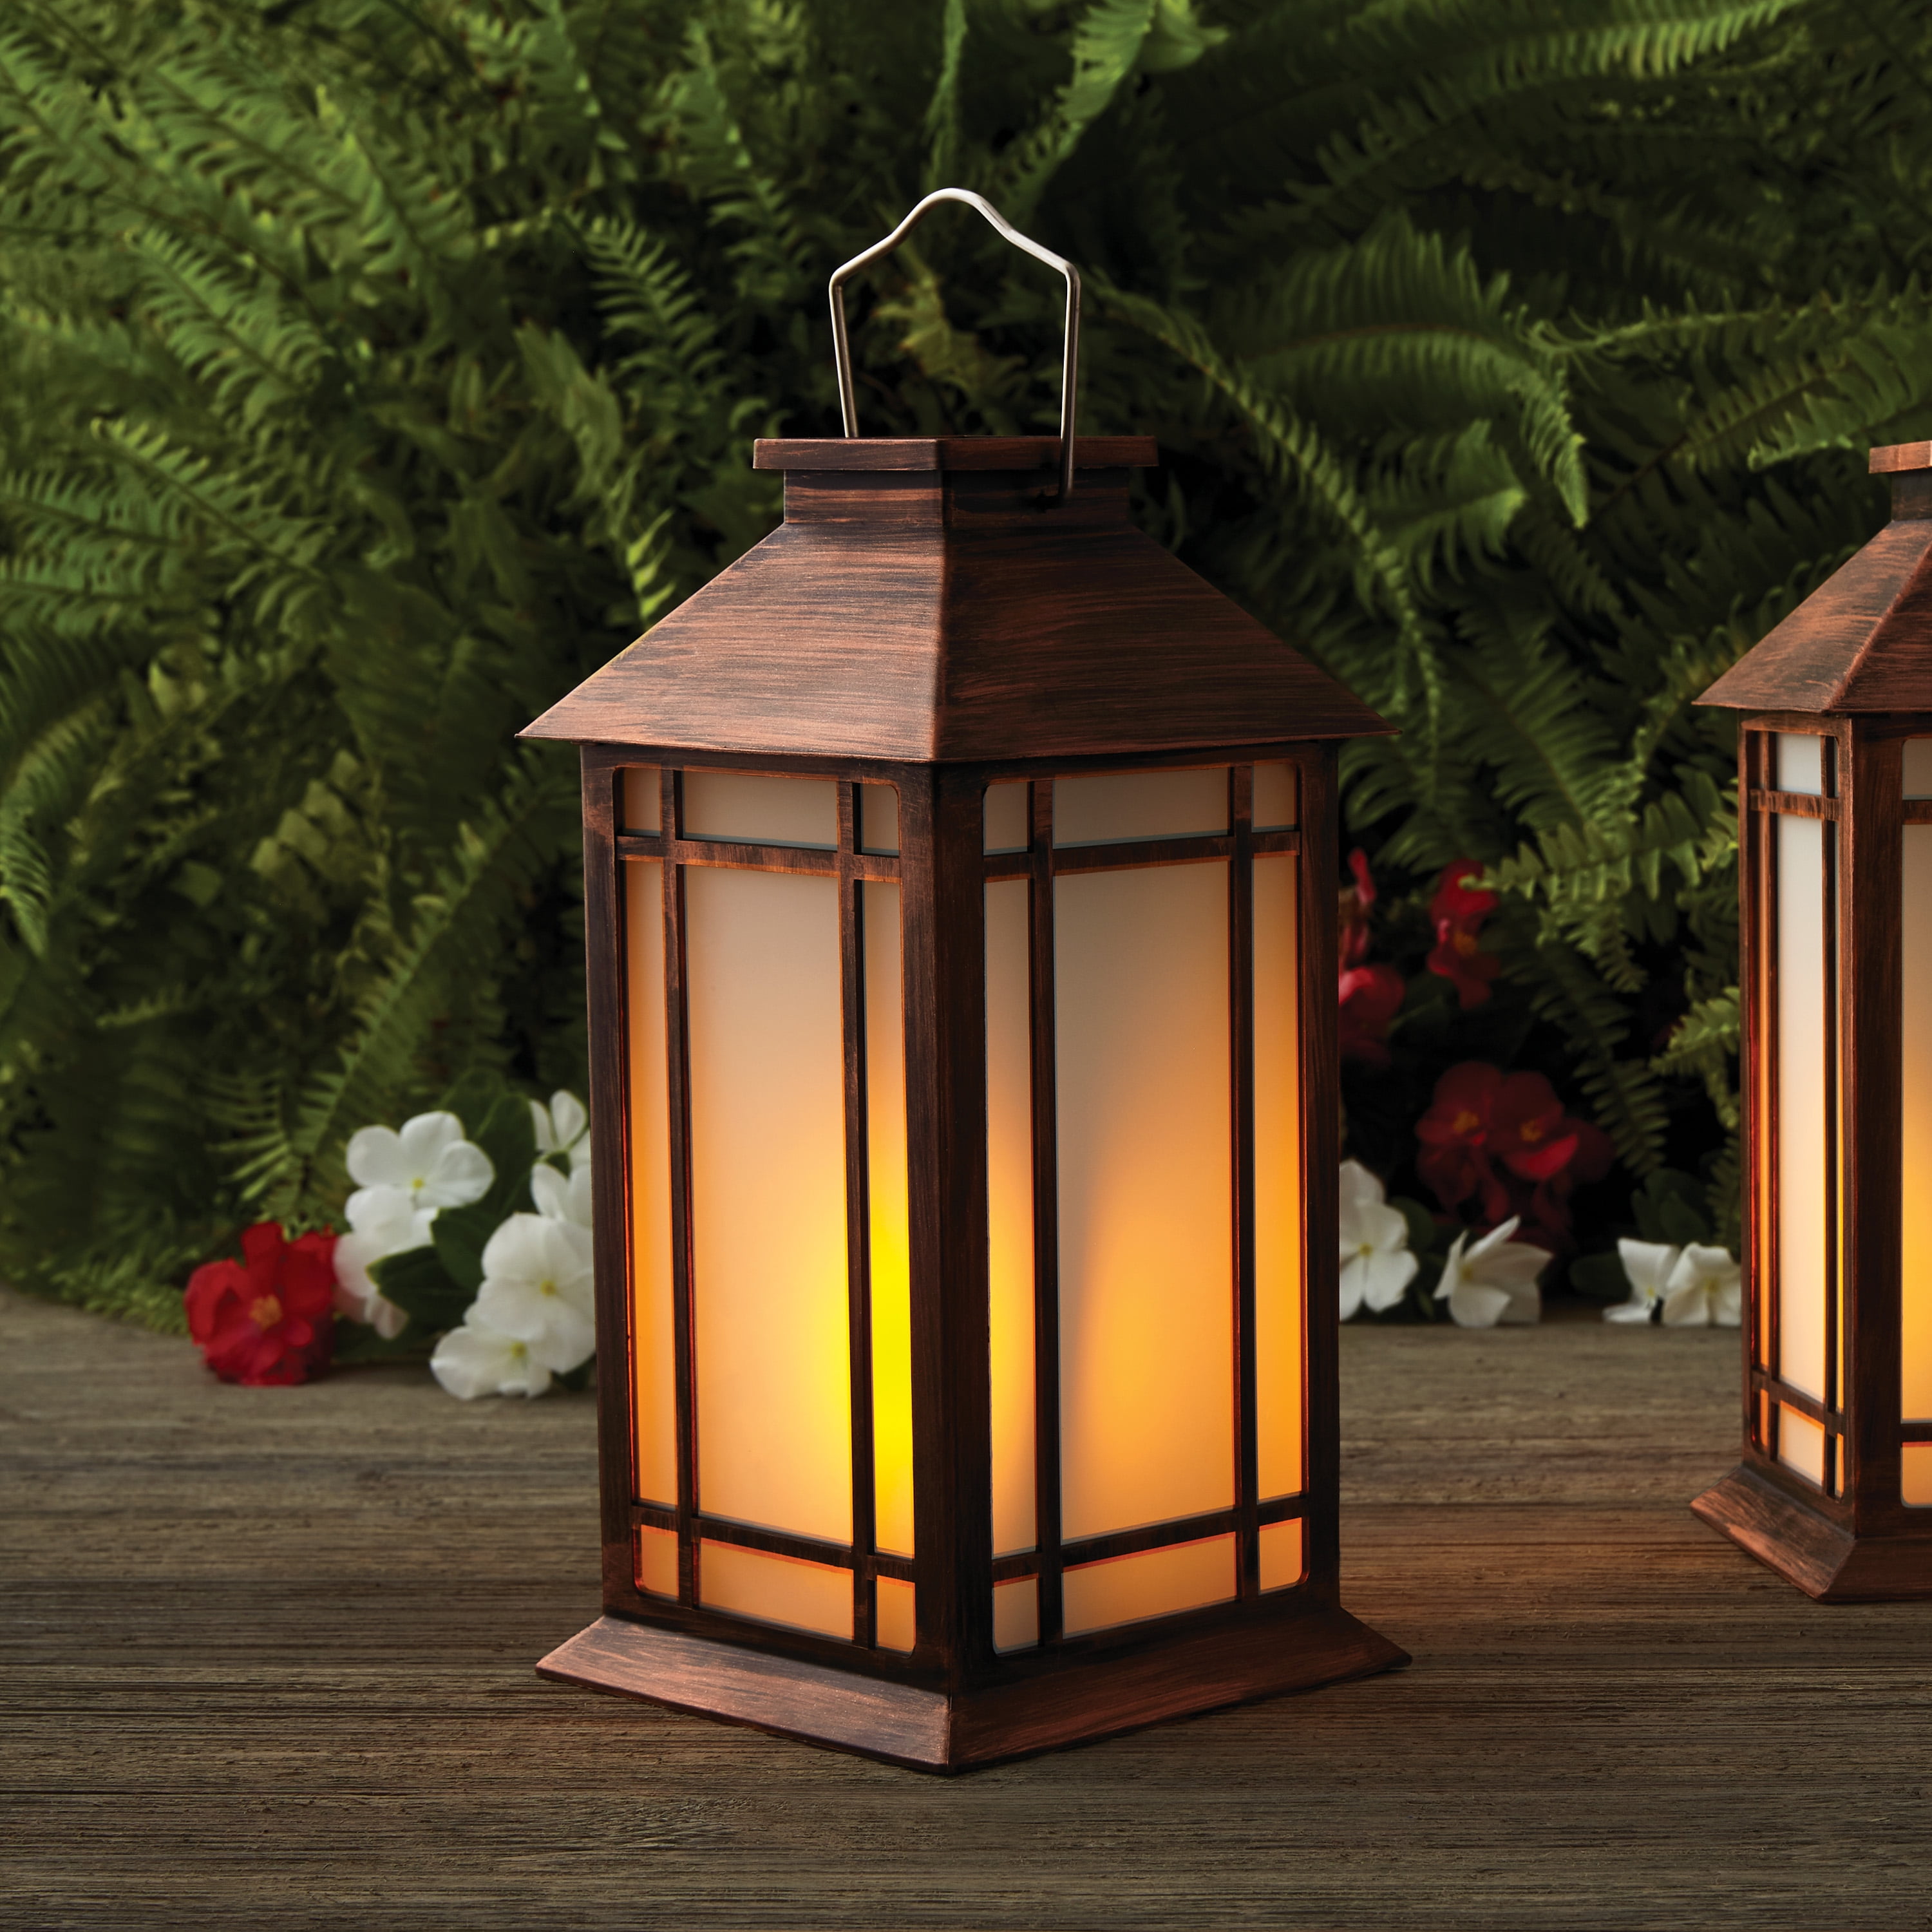 Mainstays Decorative Bronze Solar Outdoor Lantern With Flickering Flame LED  Light